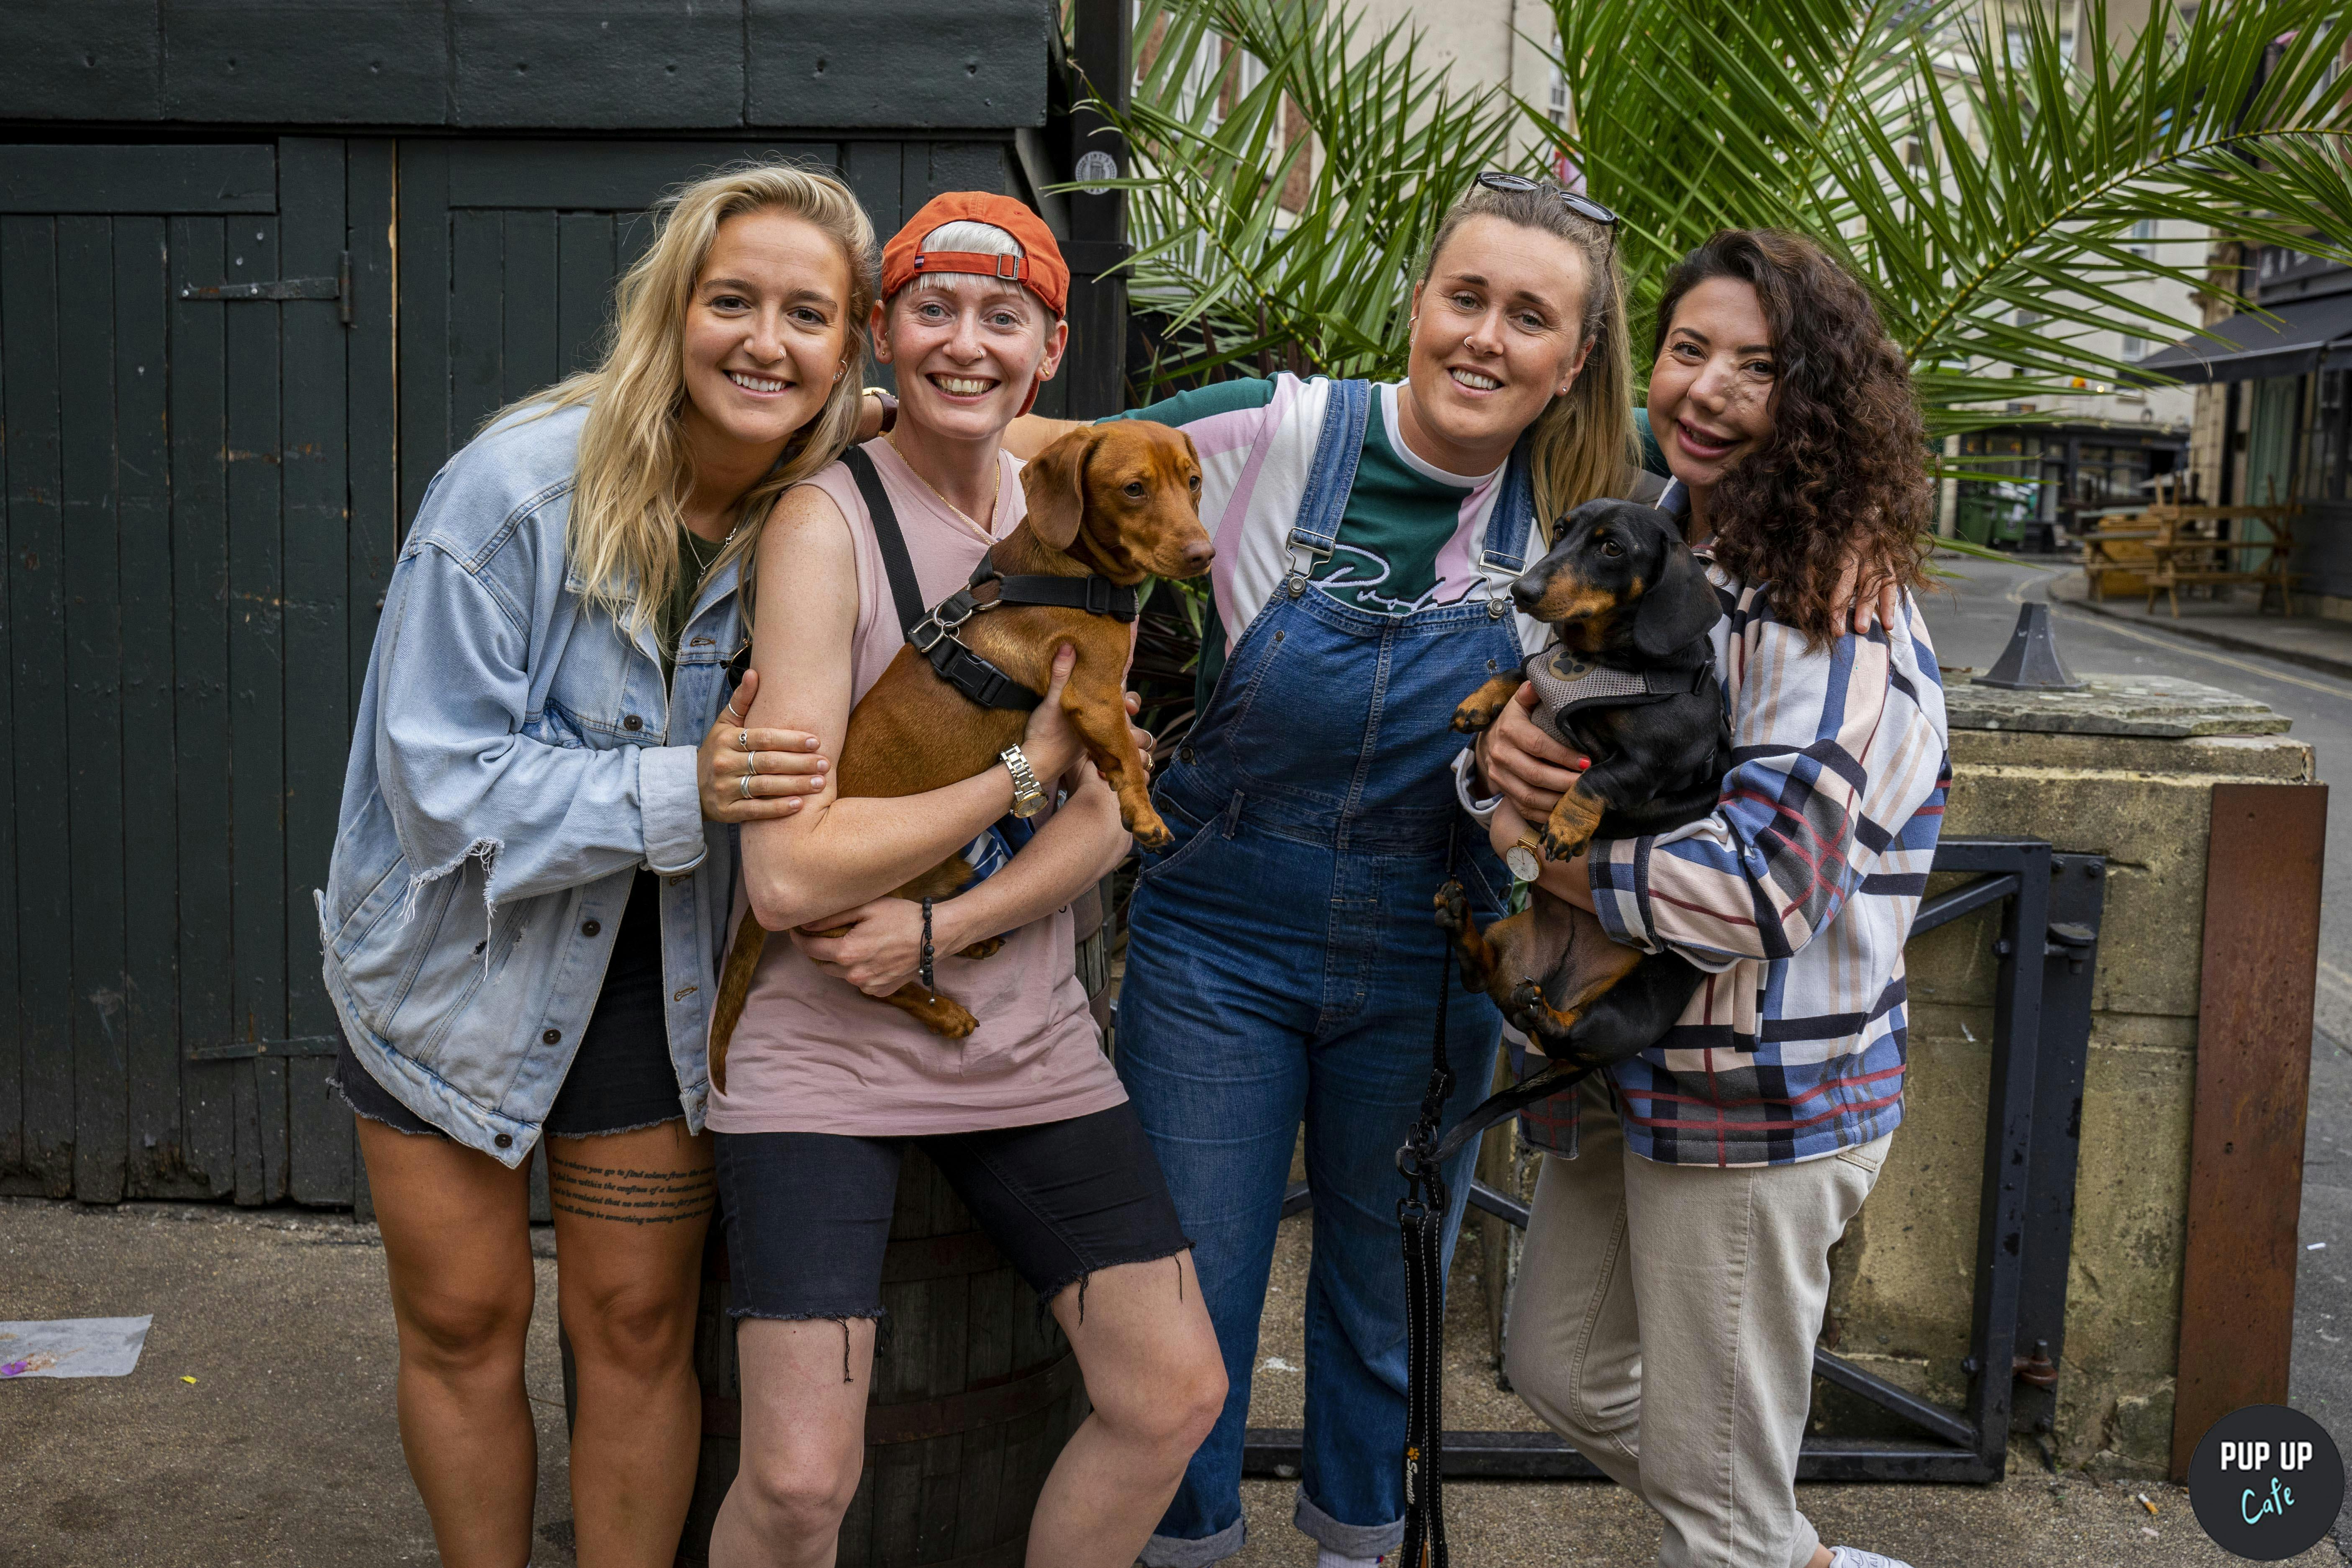 Pop up dog cafe full of Dachshunds, Pugs & Doodles set to return to Southend this summer